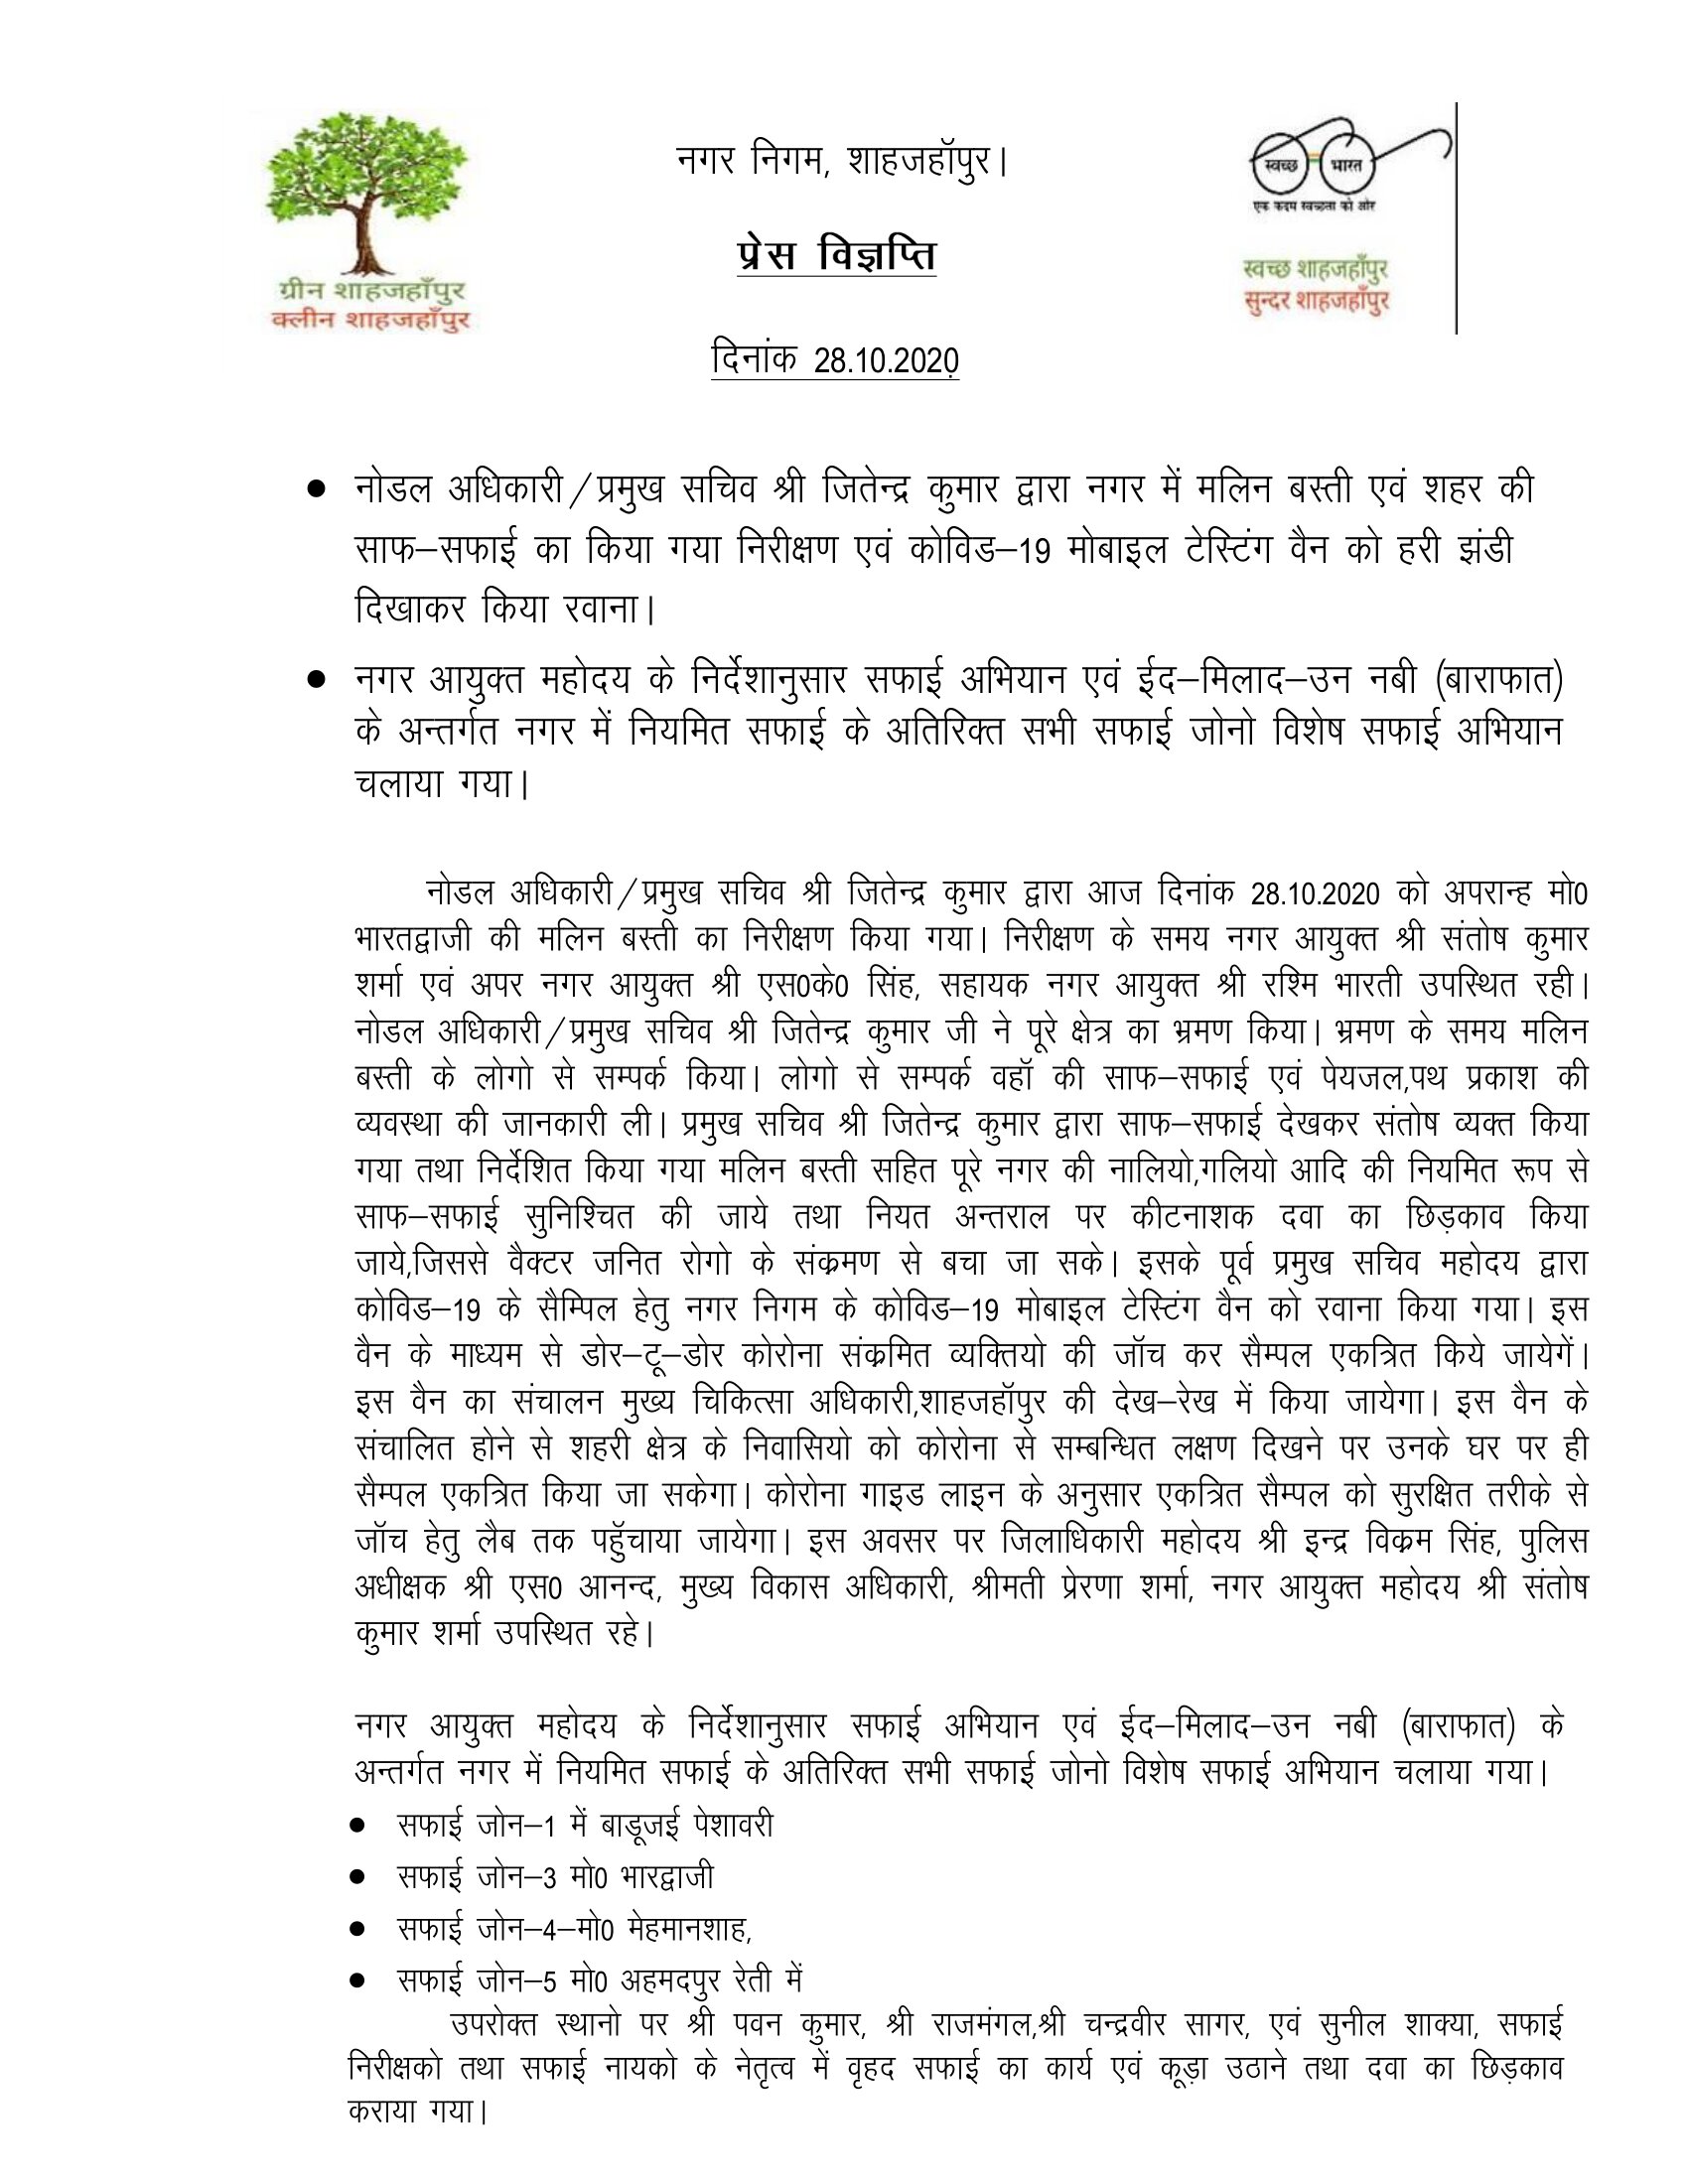 Regarding inspection of cleanliness in the city and flag off to COVID-19 Mobile Testing Van by Nodal Officer/Principal Secretary Shri Jitendra Kumar